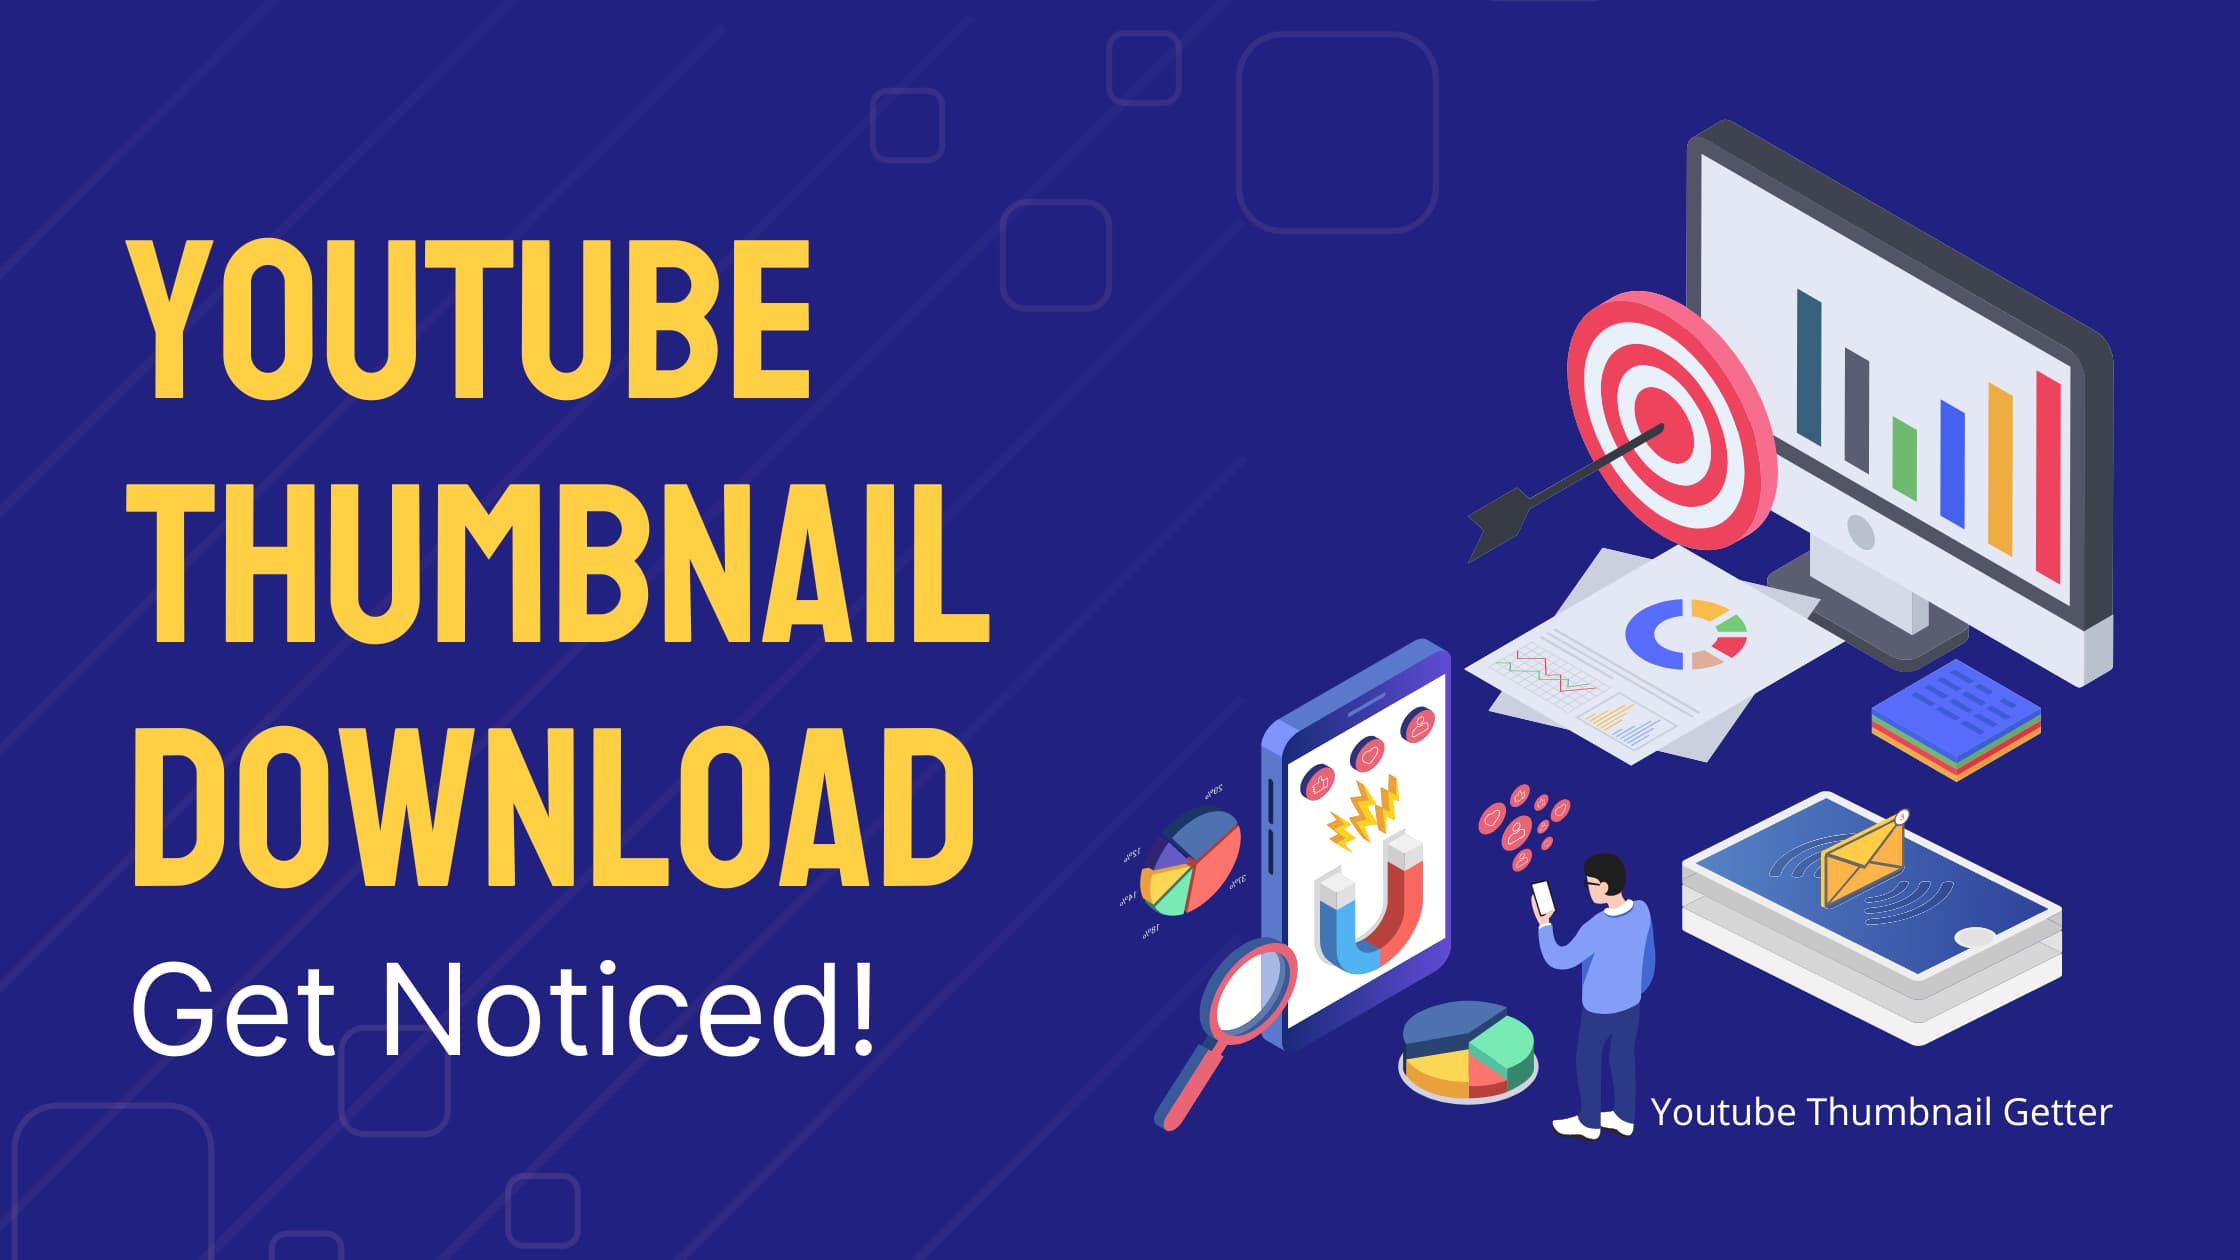 YouTube Thumbnail Download Get noticed